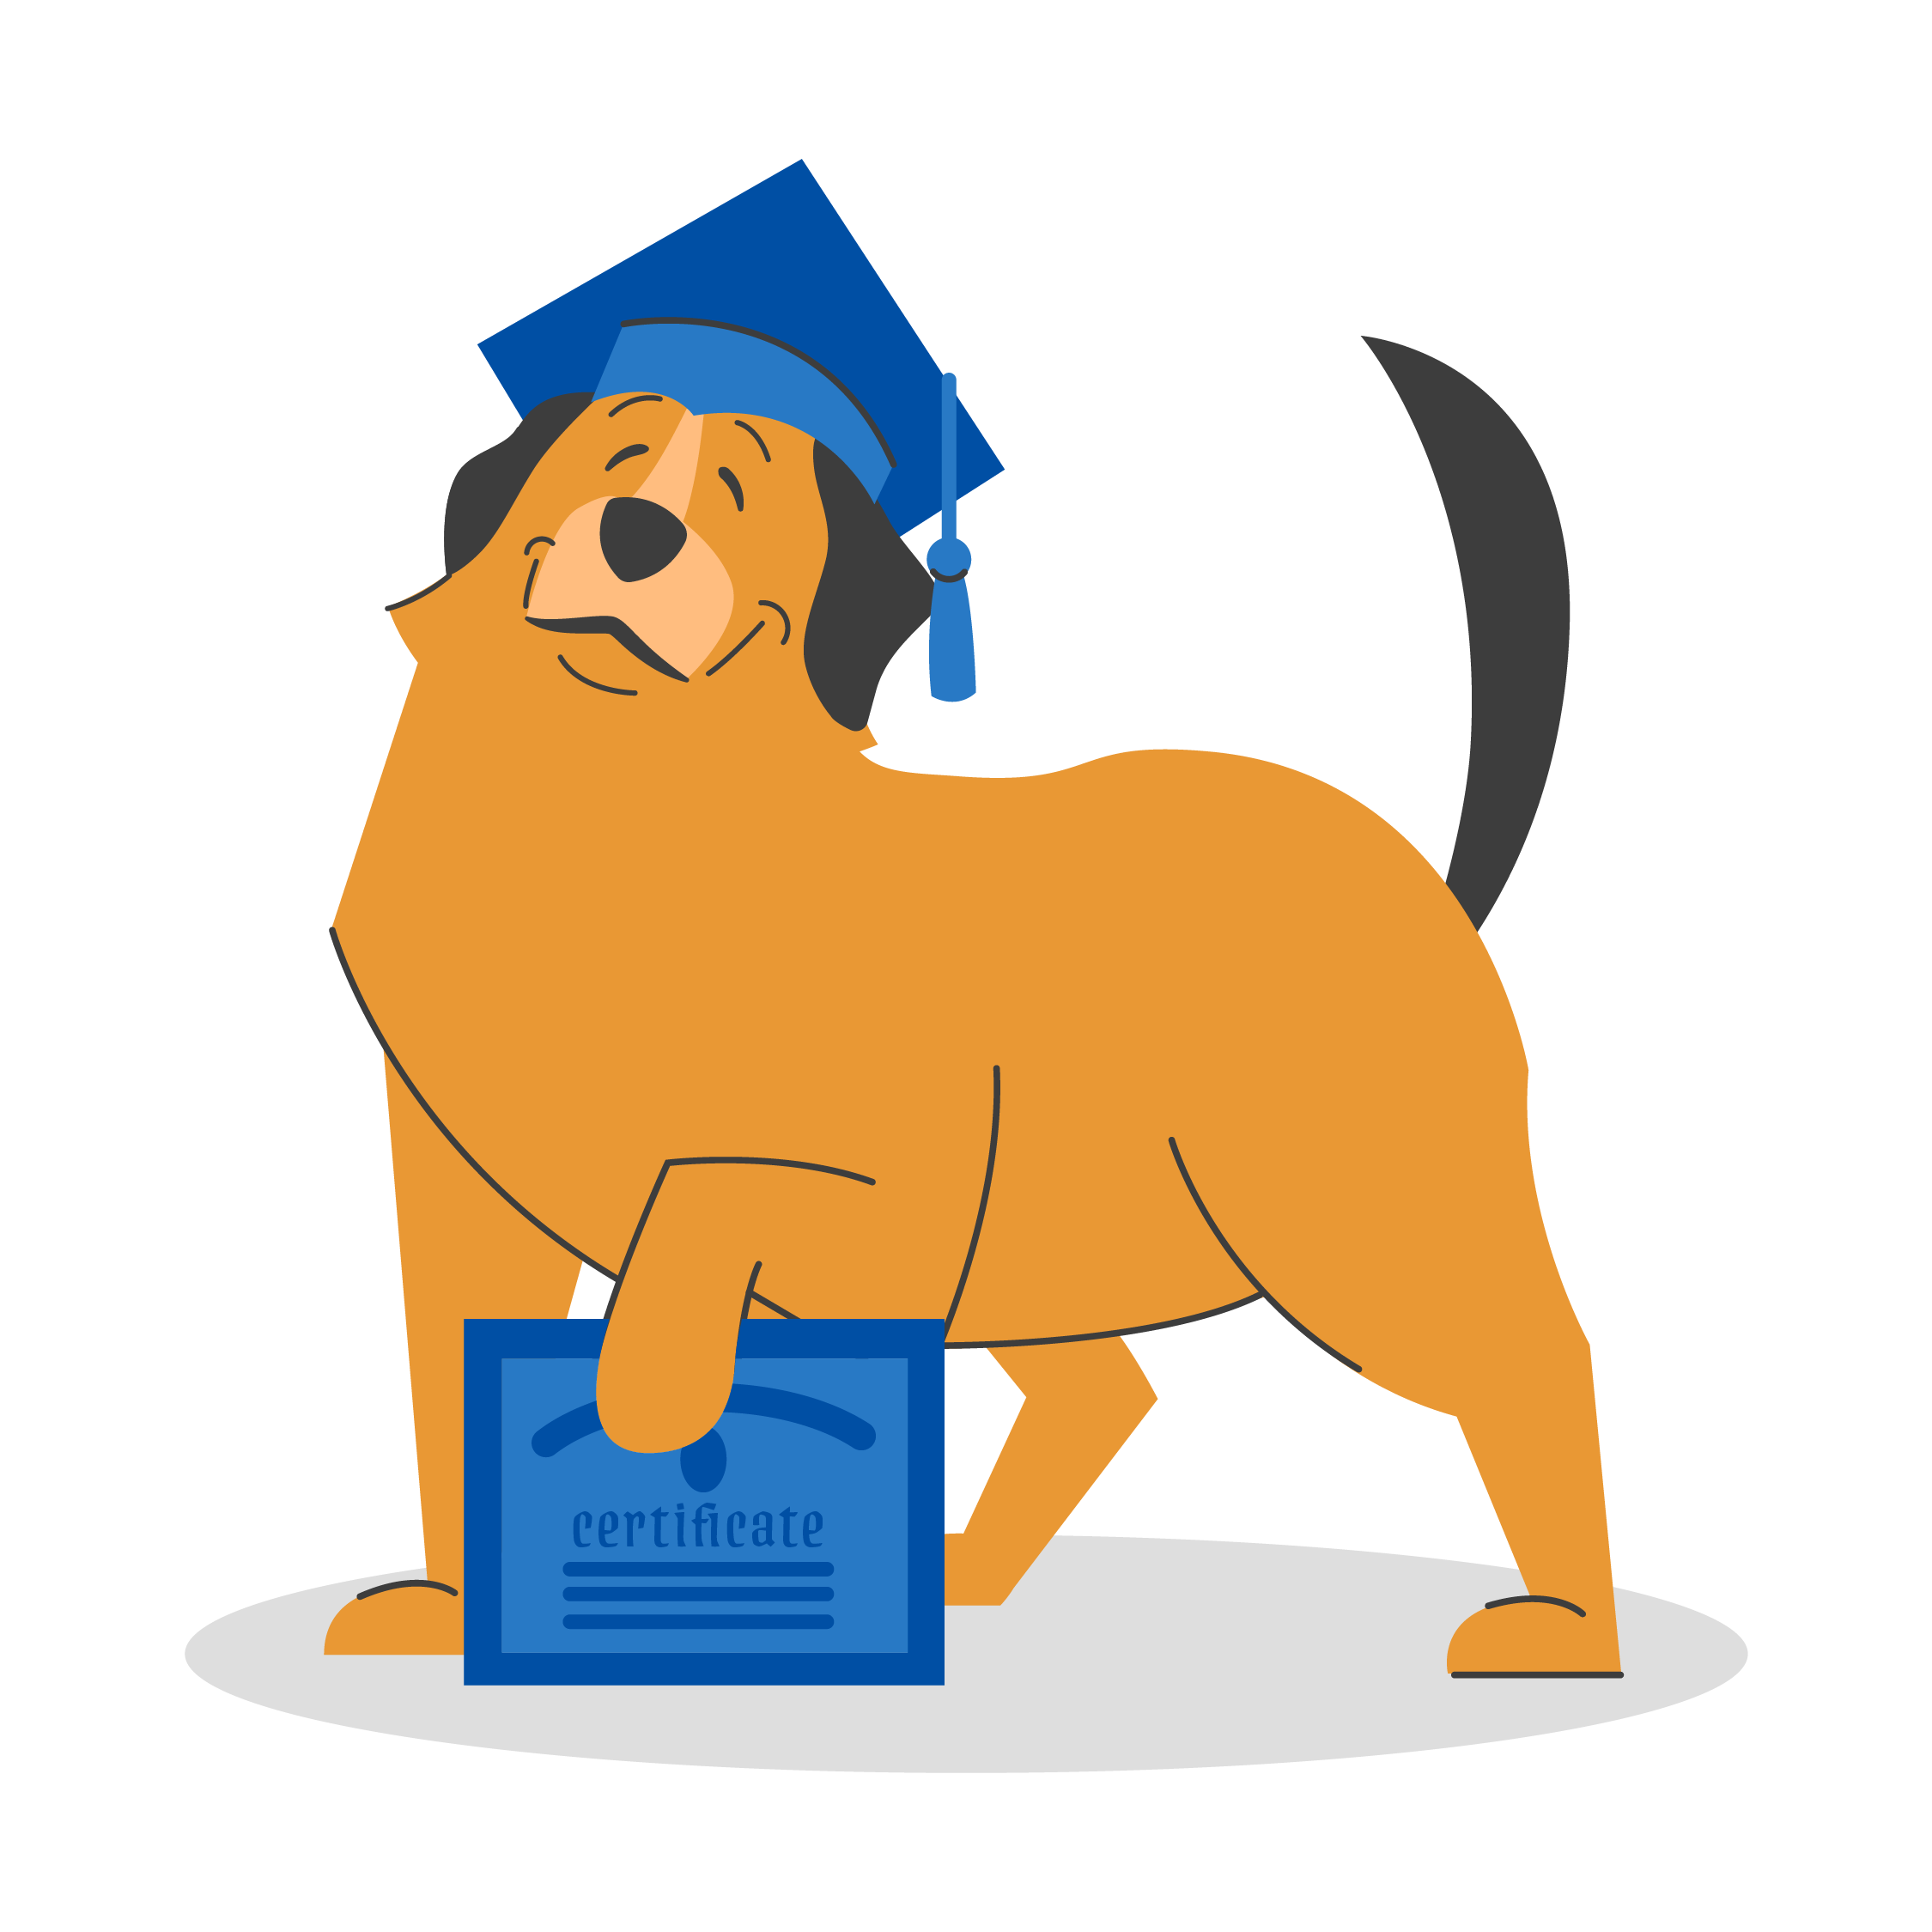 Animated brown dog standing and smiling with a blue graduation cap on, holding a graduation certificate